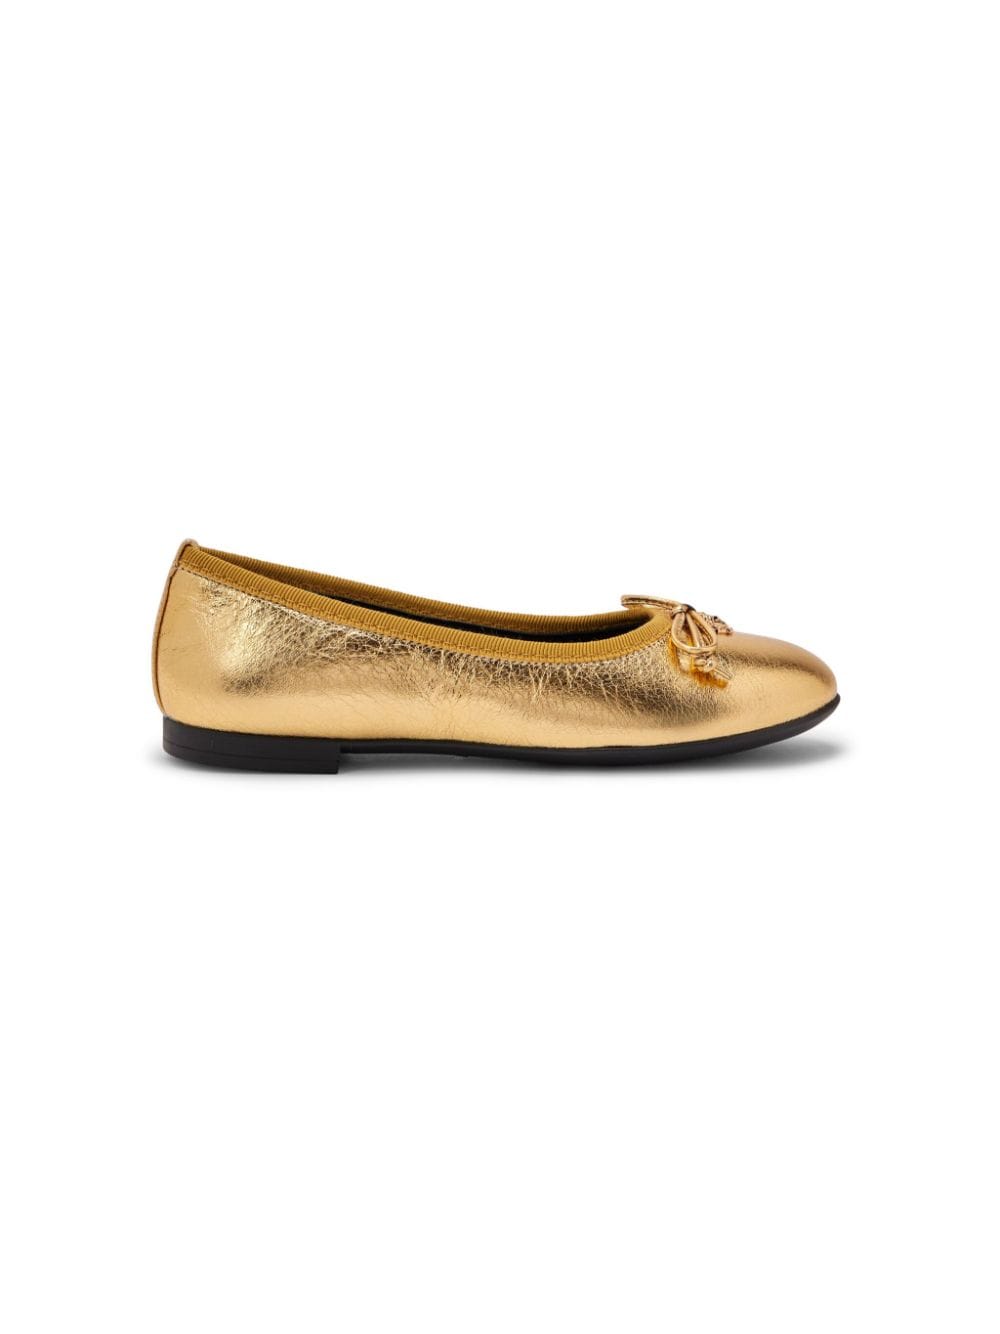 Metallic leather ballerina shoes<BR/><BR/><BR/>